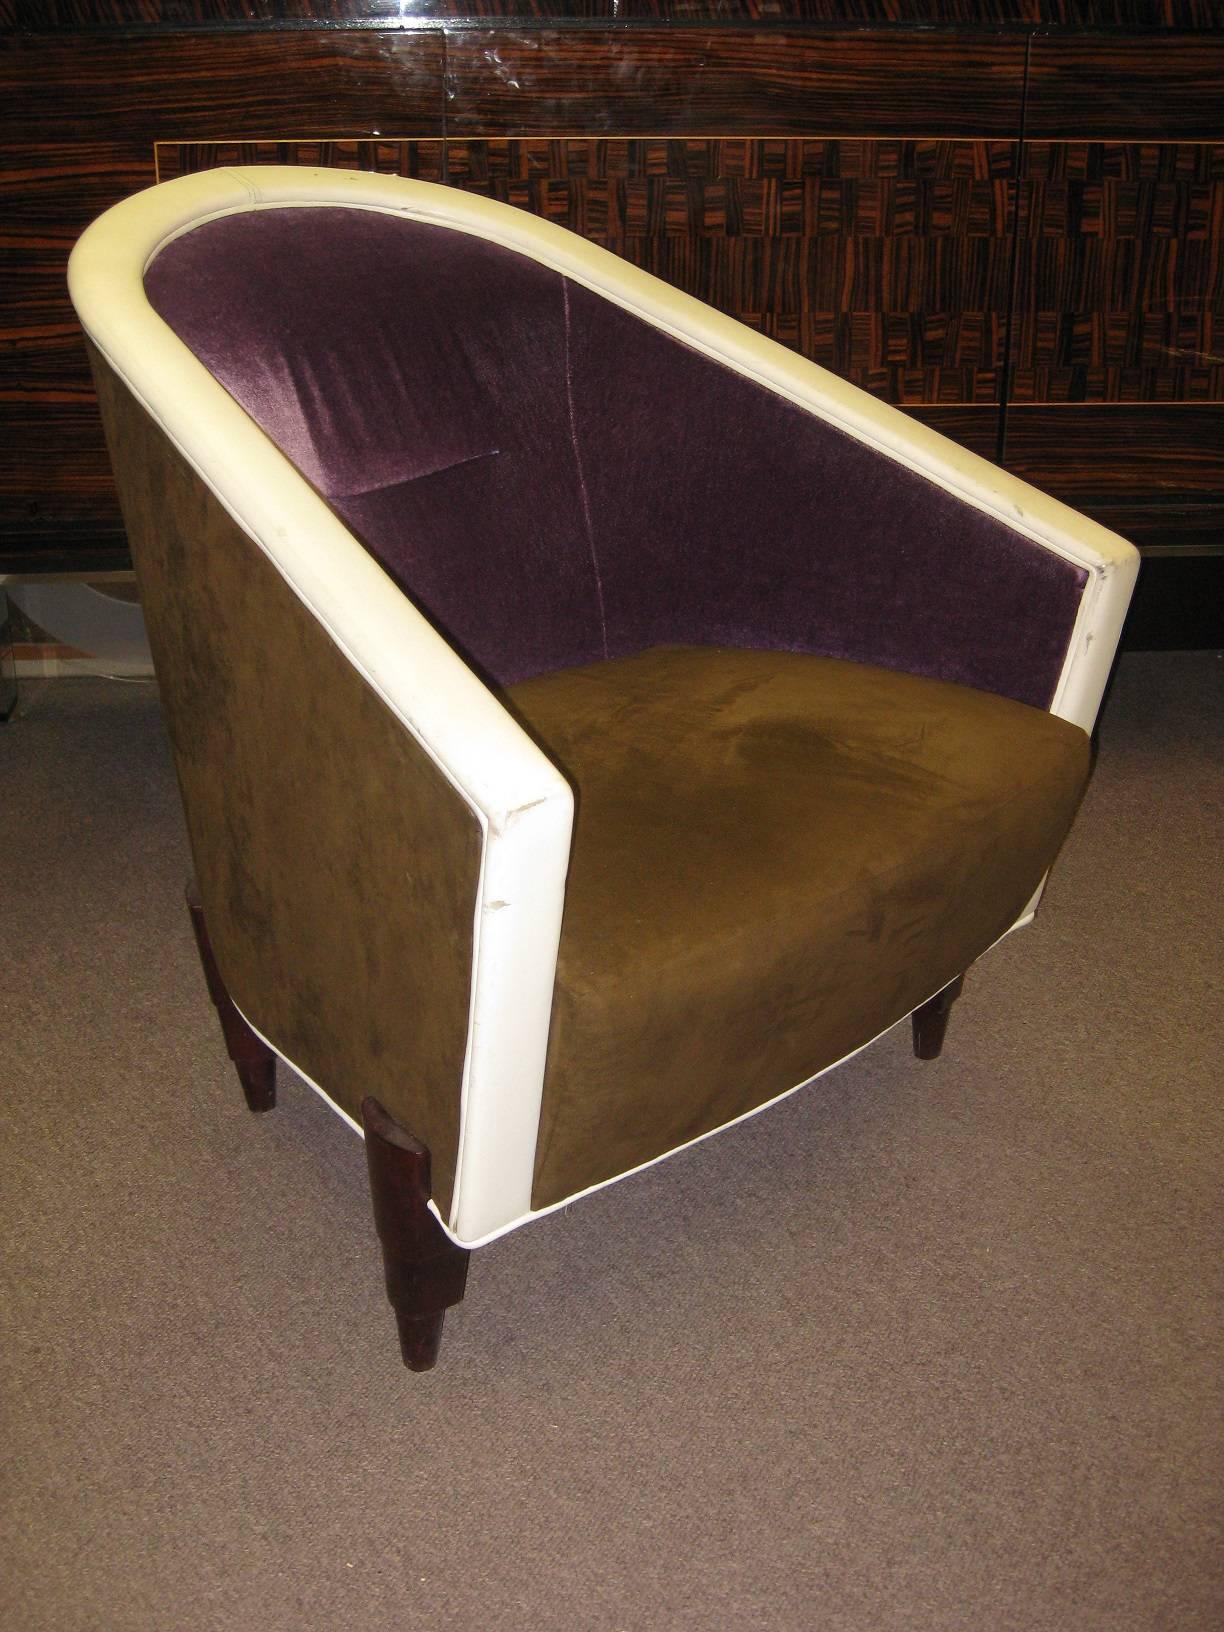 Pair or one club chairs, extremely comfortable. Streamlined form, upholstered in purple aubergine mohair and mocha suede and raised on stepped wood legs.
Italian, by Colber International, from a French hotel near the Champs- Elysees.
Price is per